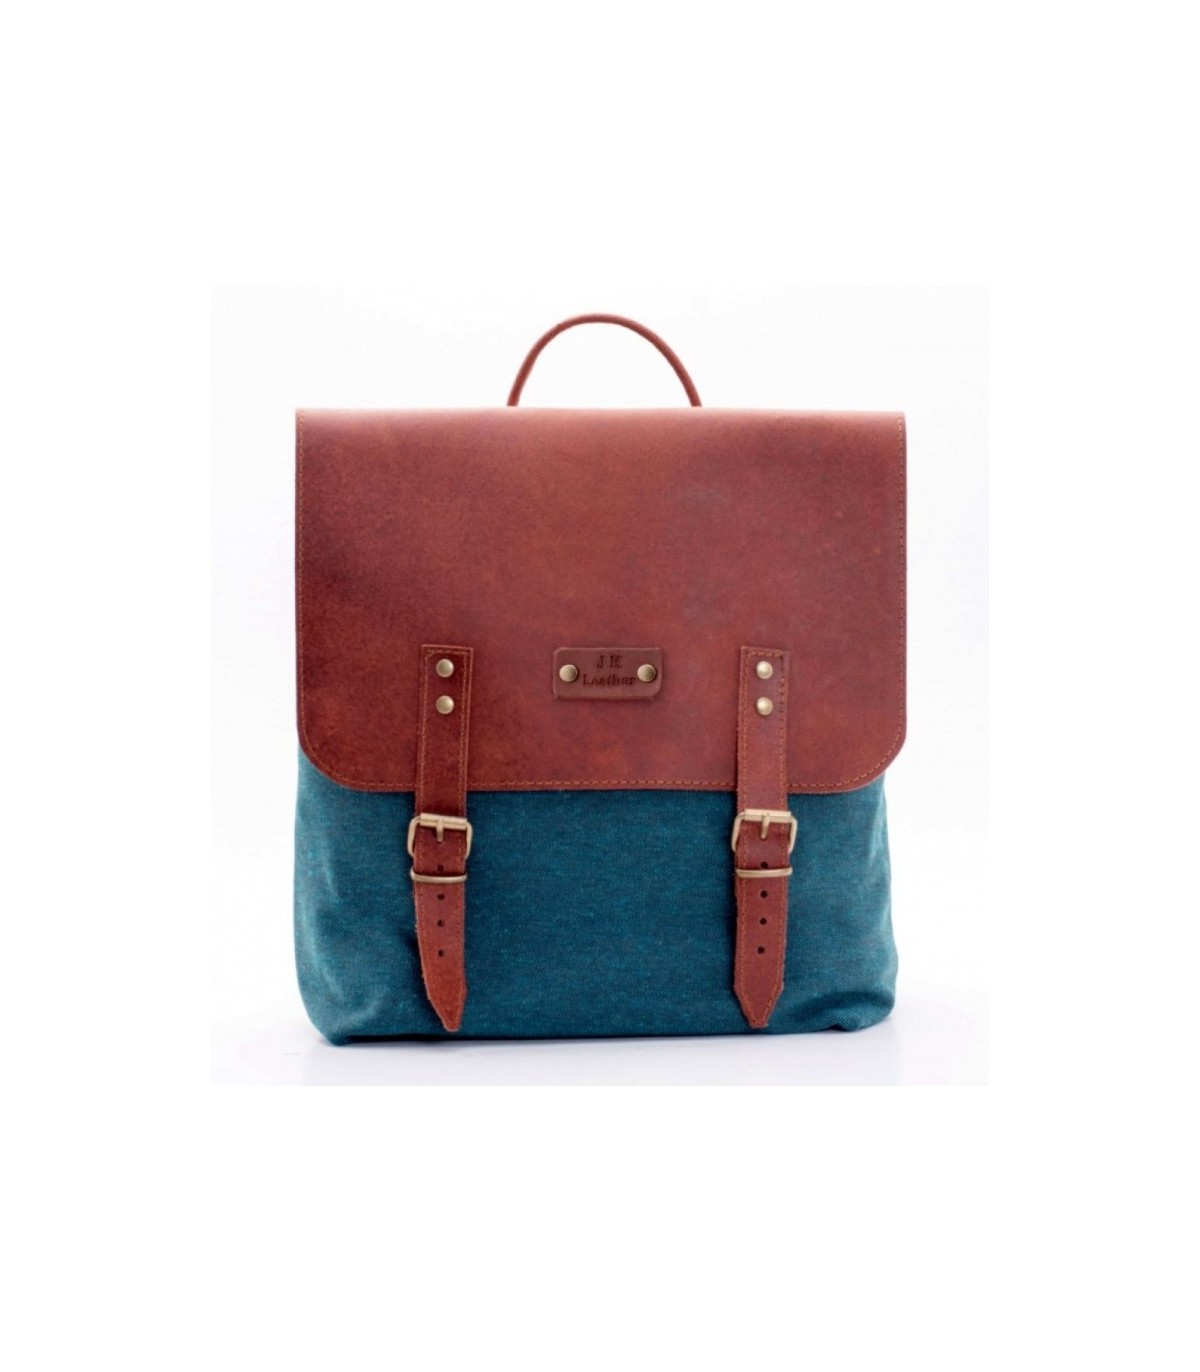 Women leather backpack